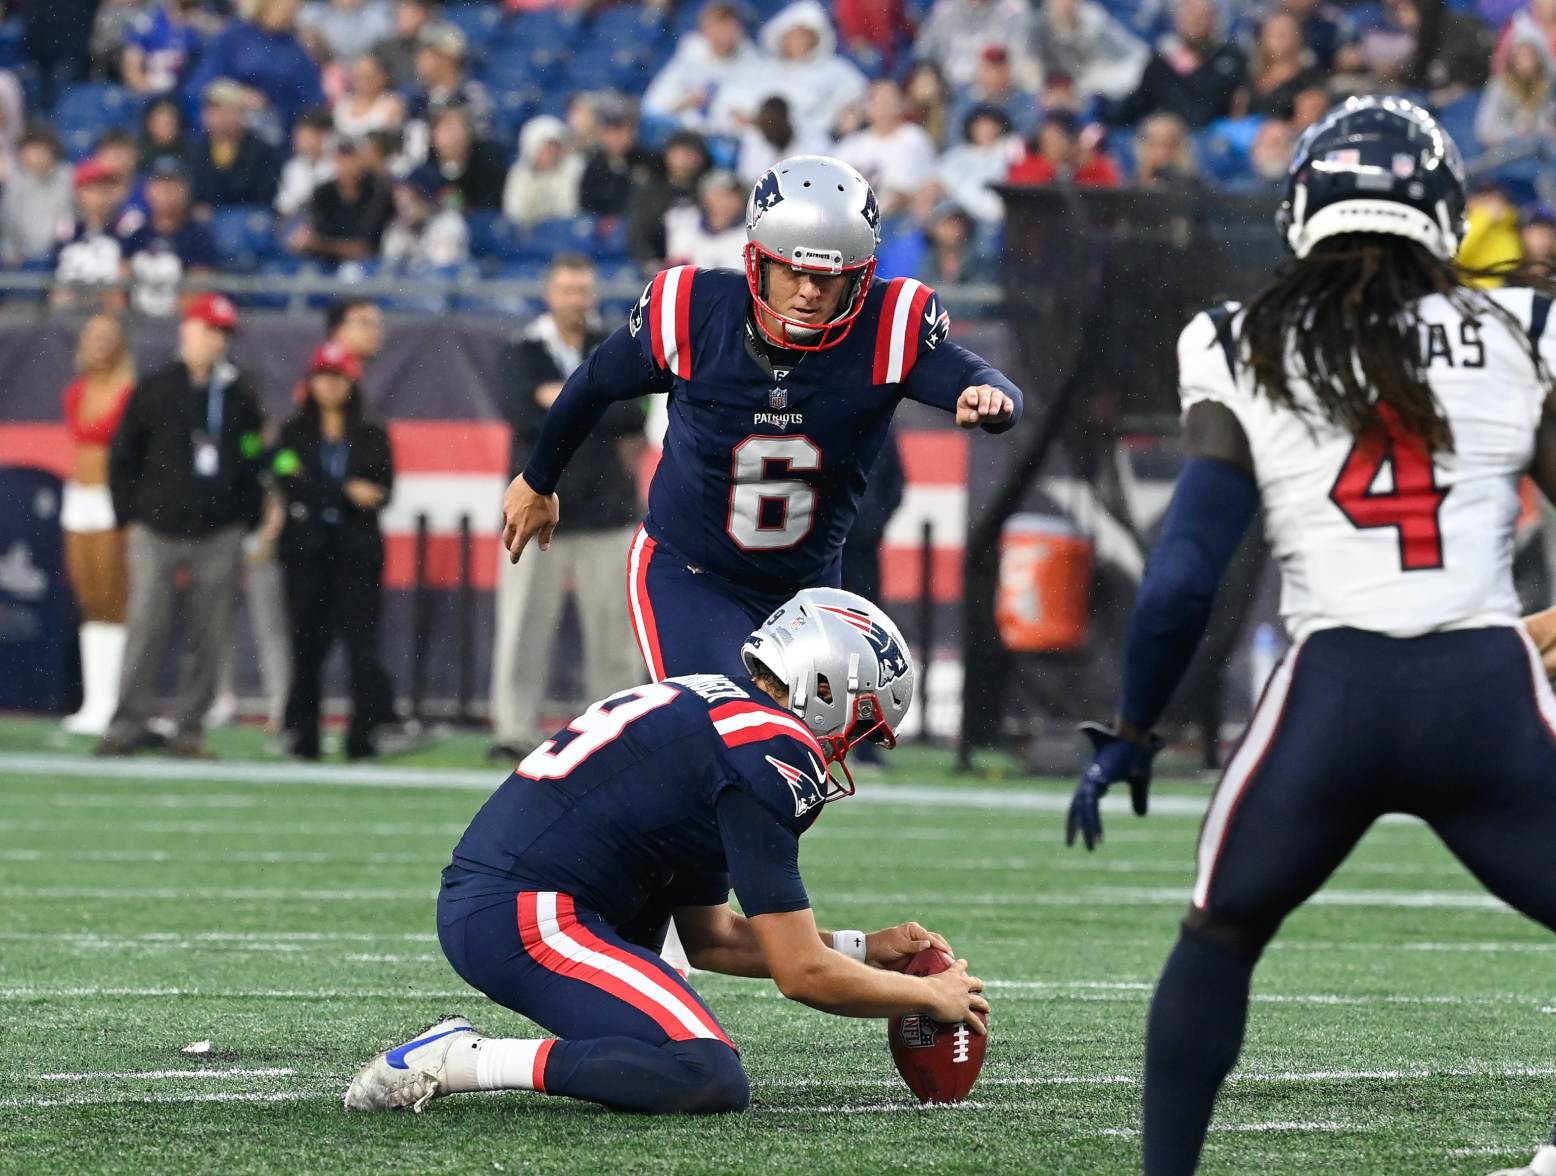 Aug 10, 2023; Foxborough, Massachusetts, USA; New England Patriots place kicker Nick Folk (6) kicks a field goal during the first half against the Houston Texans at Gillette Stadium. Credit: Eric Canha-USA TODAY Sports